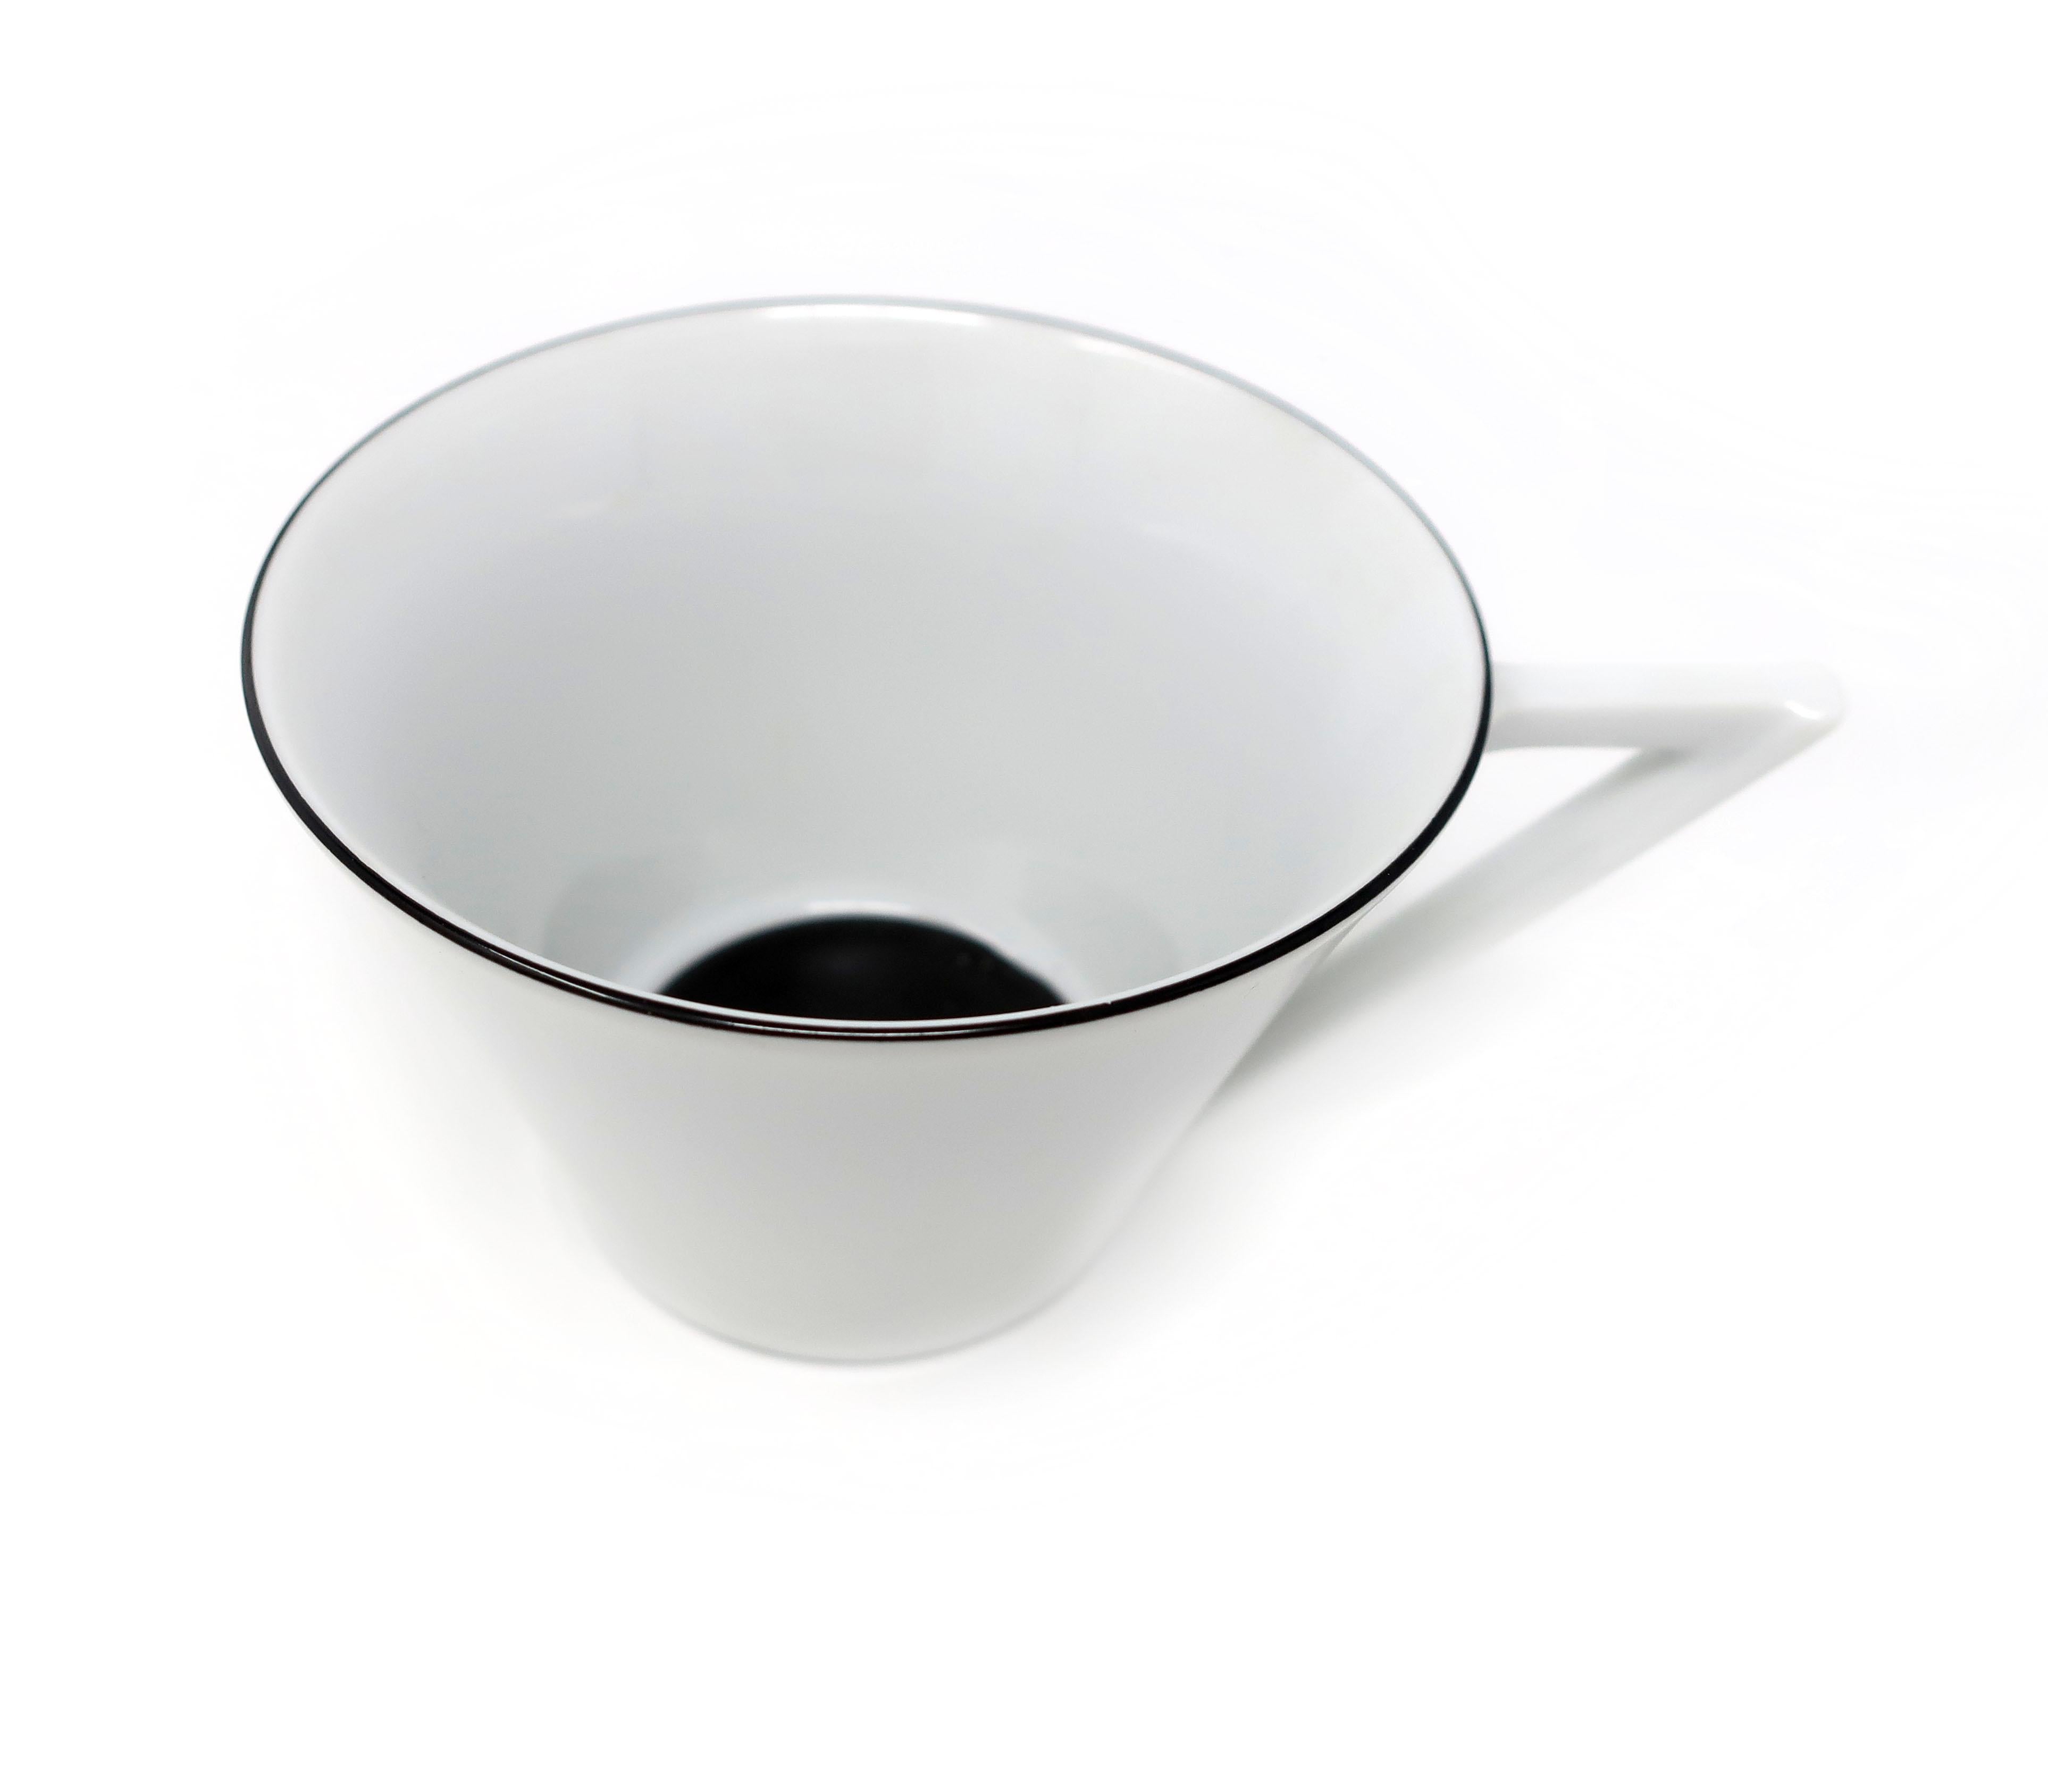 Porcelain Andree Putman for Sasaki Cups and Saucers